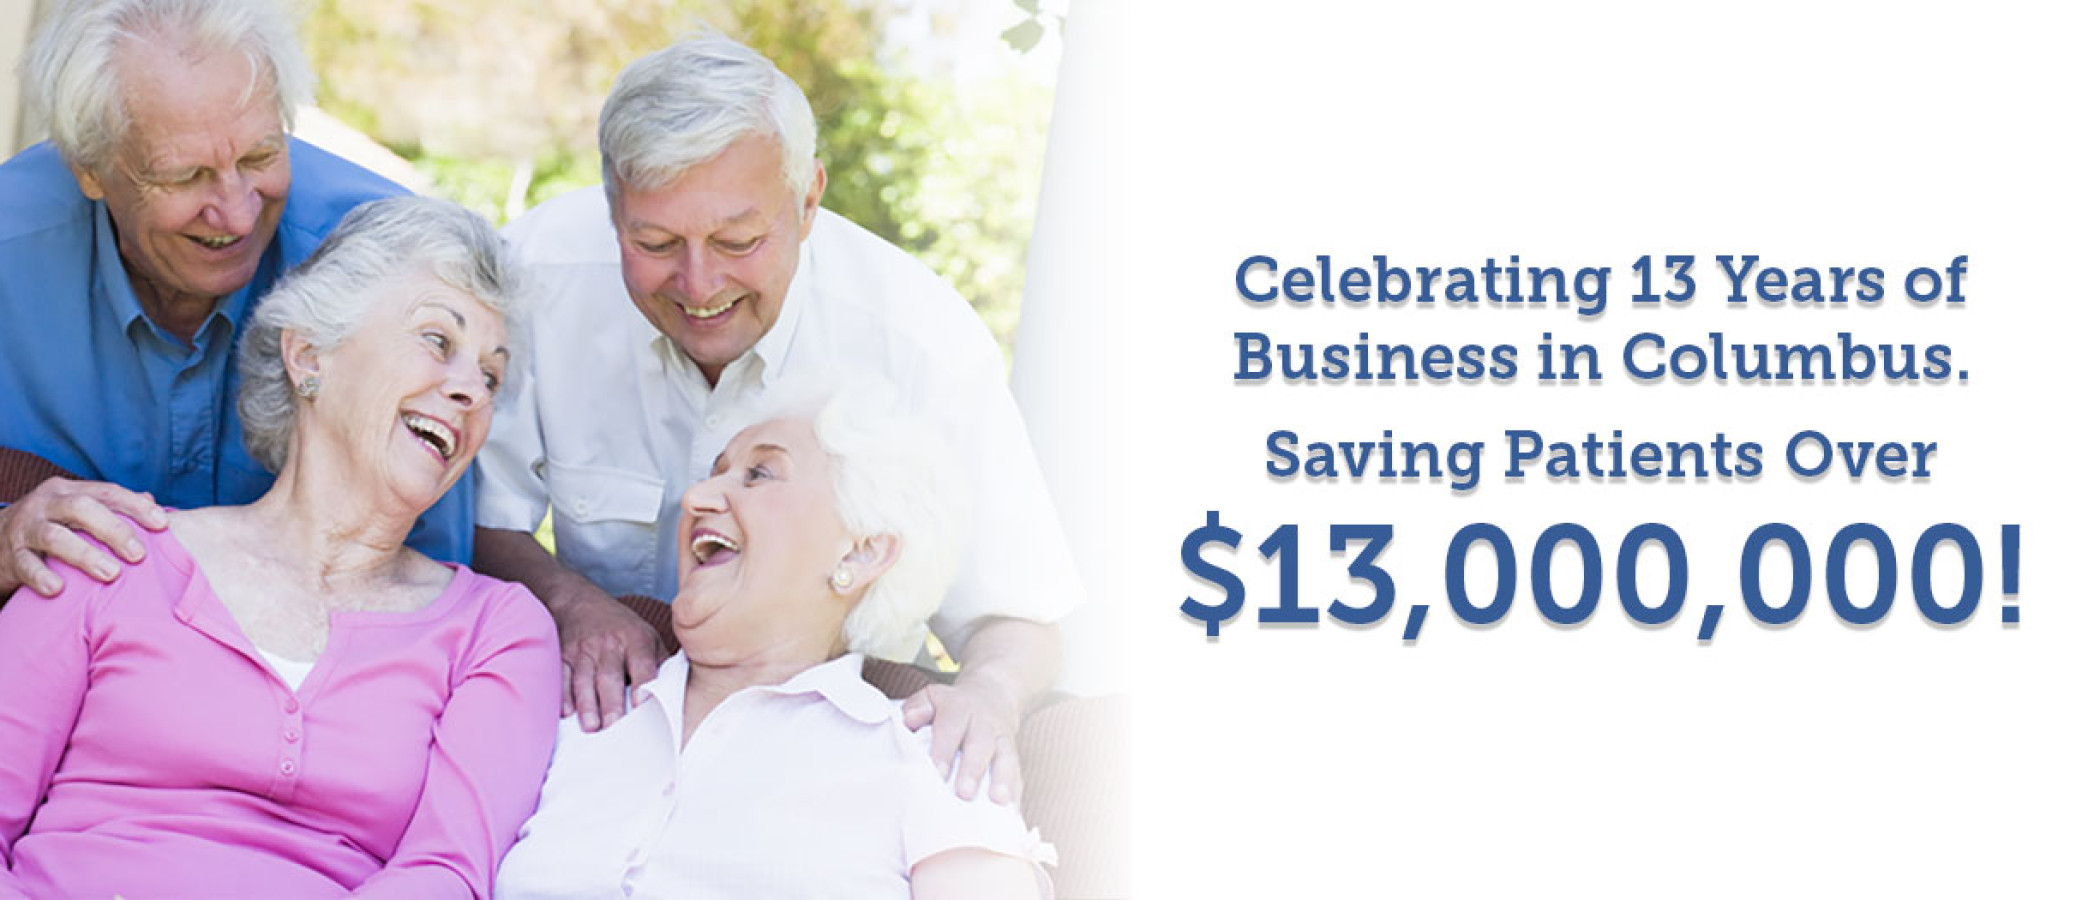 Celebrating 11 Years of business in Columbus - Saving patients over $11,000,000!